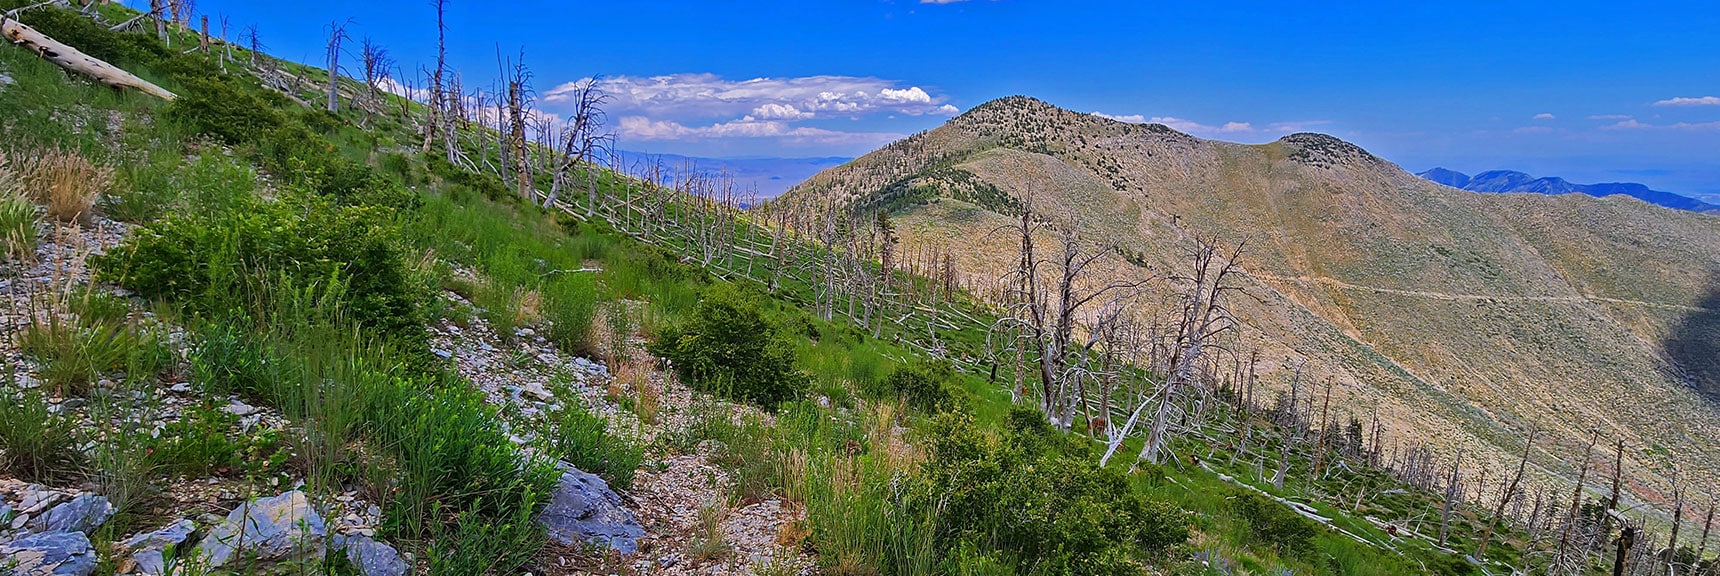 Trail Disappearing. Hard But Not Impossible to Stay on Track. | Fletcher Canyon Trailhead to Harris Mountain Summit to Griffith Peak Summit Circuit Adventure | Mt. Charleston Wilderness, Nevada